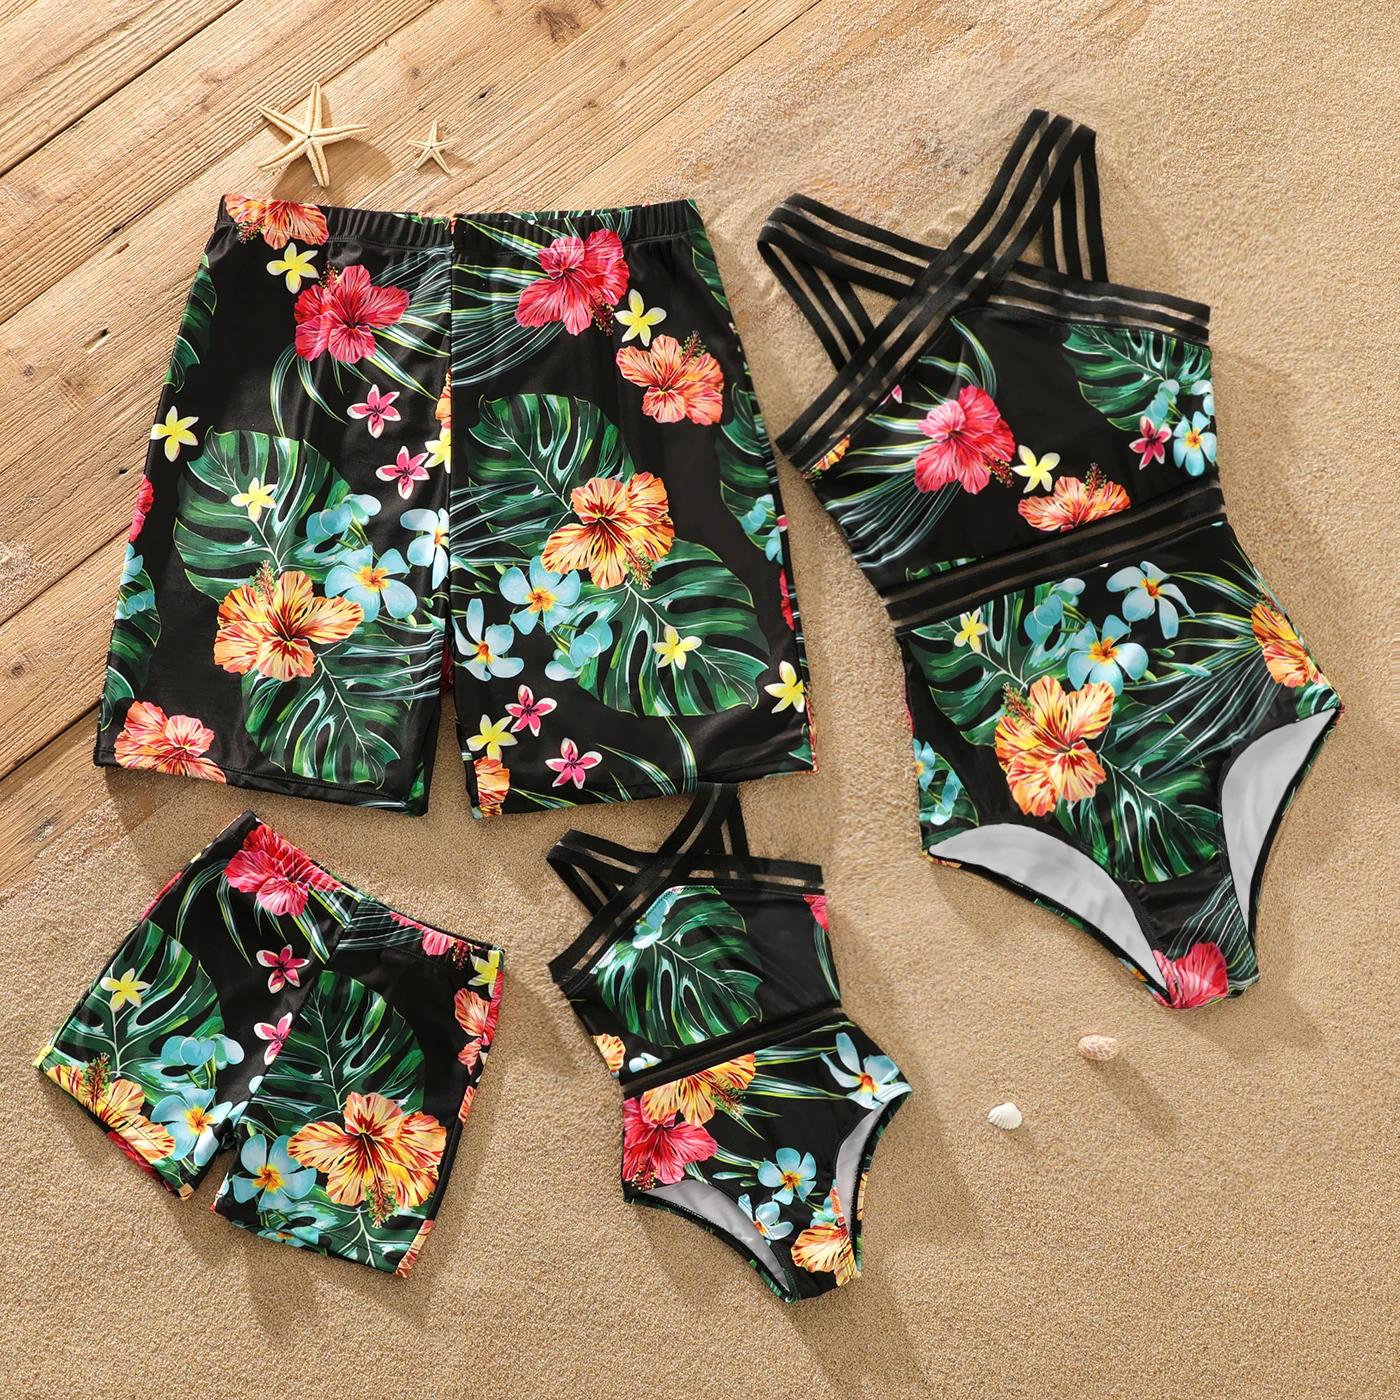 PatPat Family Matching All Over Tropical Plants Print Black Swim Trunks Shorts and Webbing One-Piece Swimsuit